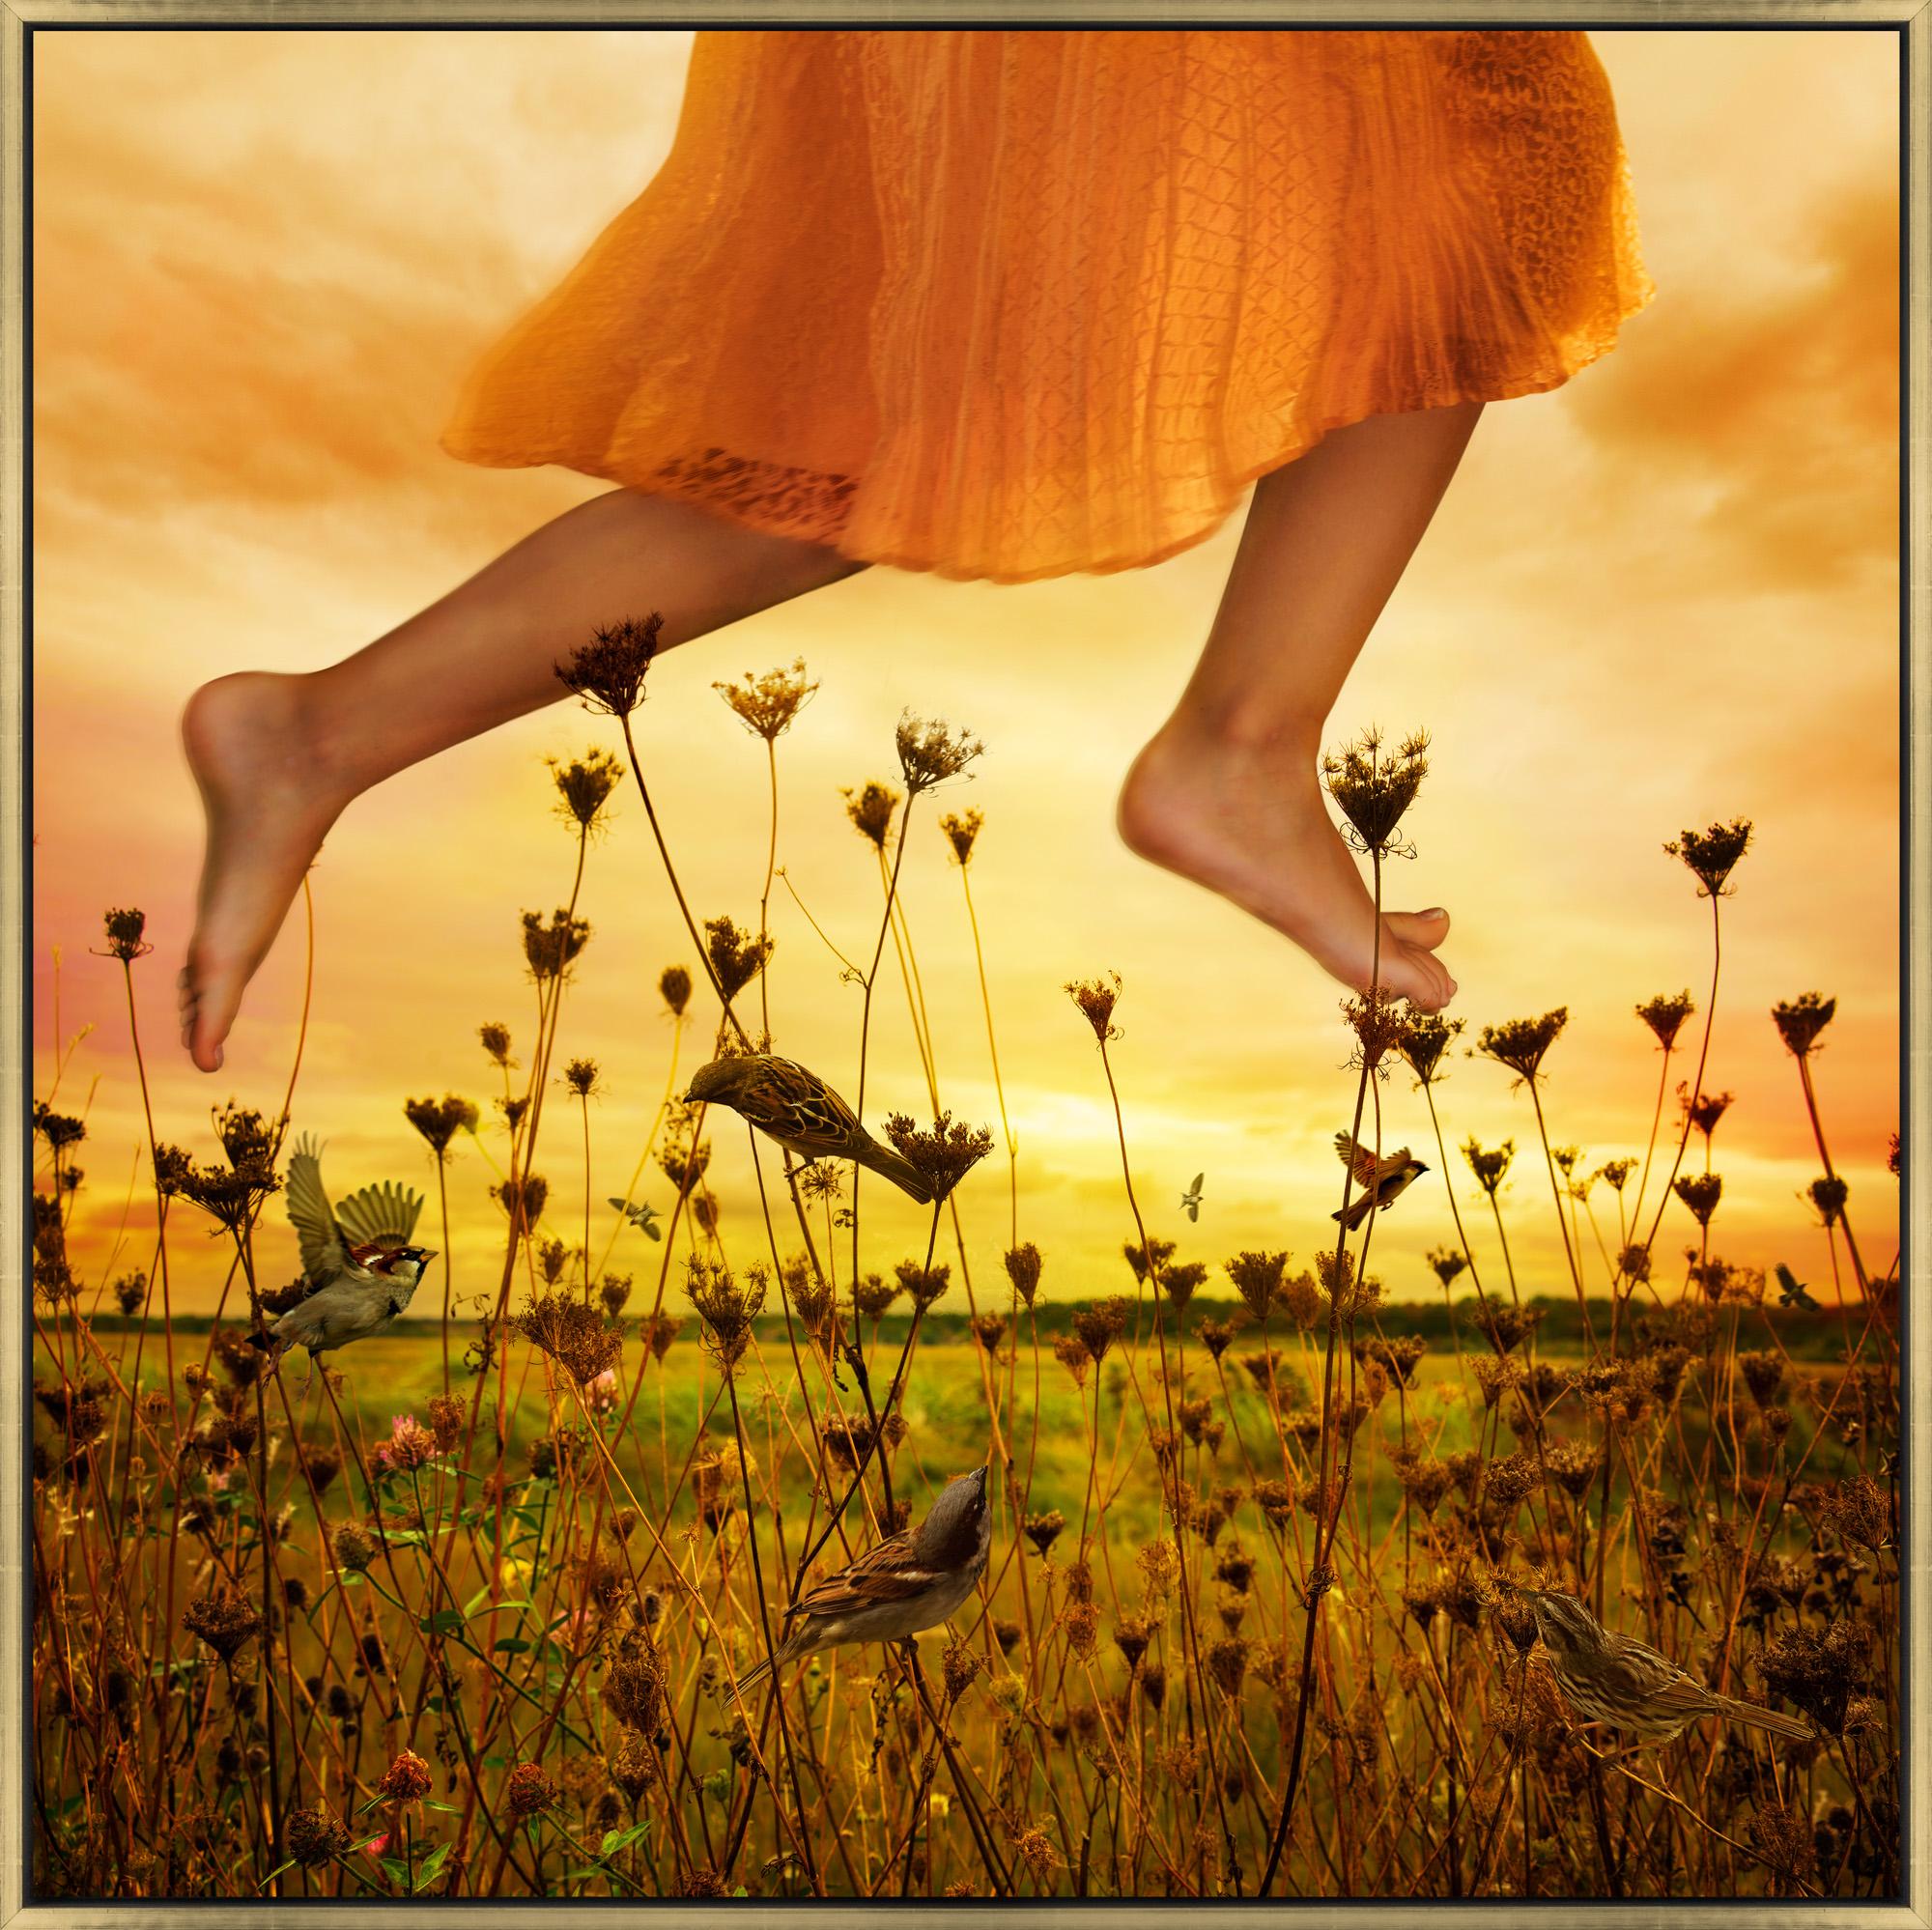 Tom Chambers Color Photograph - "Marsh Flight" Whimsical Photograph with Figure Jumping Over Flowers with Birds